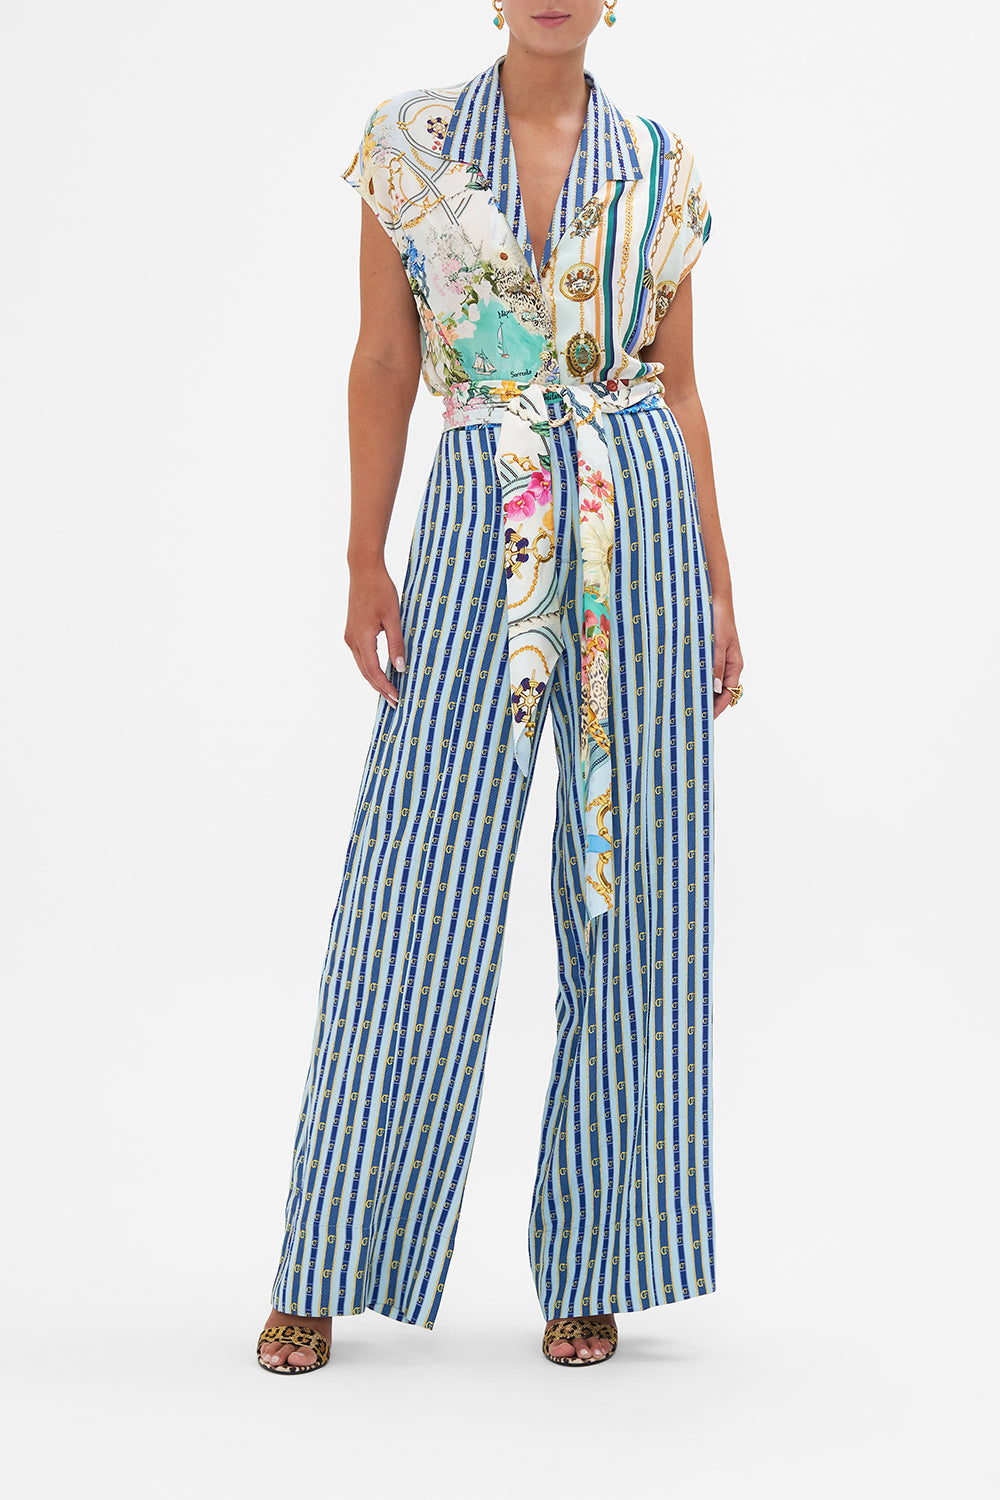 Front view of CAMILLA wide leg pants in Amalfi Lullaby print